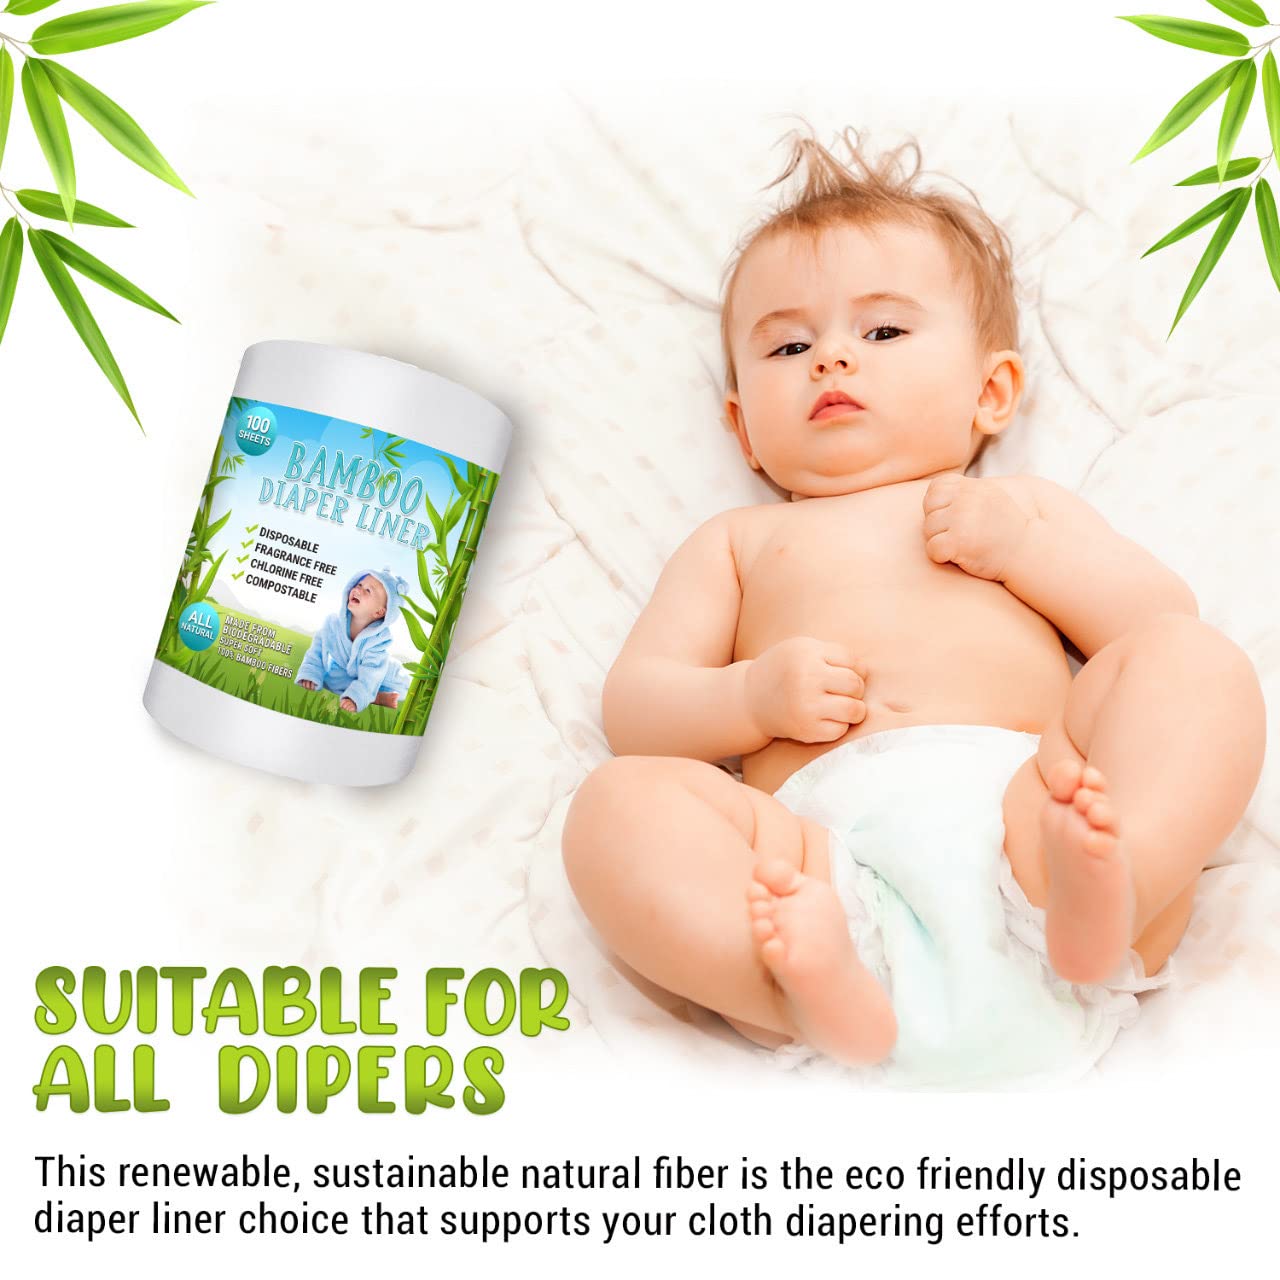 Disposable Cloth Bamboo Diaper Liners - Eco-Friendly, Fragrance Free & Chlorine Free, Flushable Biodegradable Reusable Liners For Cloth Diaper 100 Sheets Per Roll